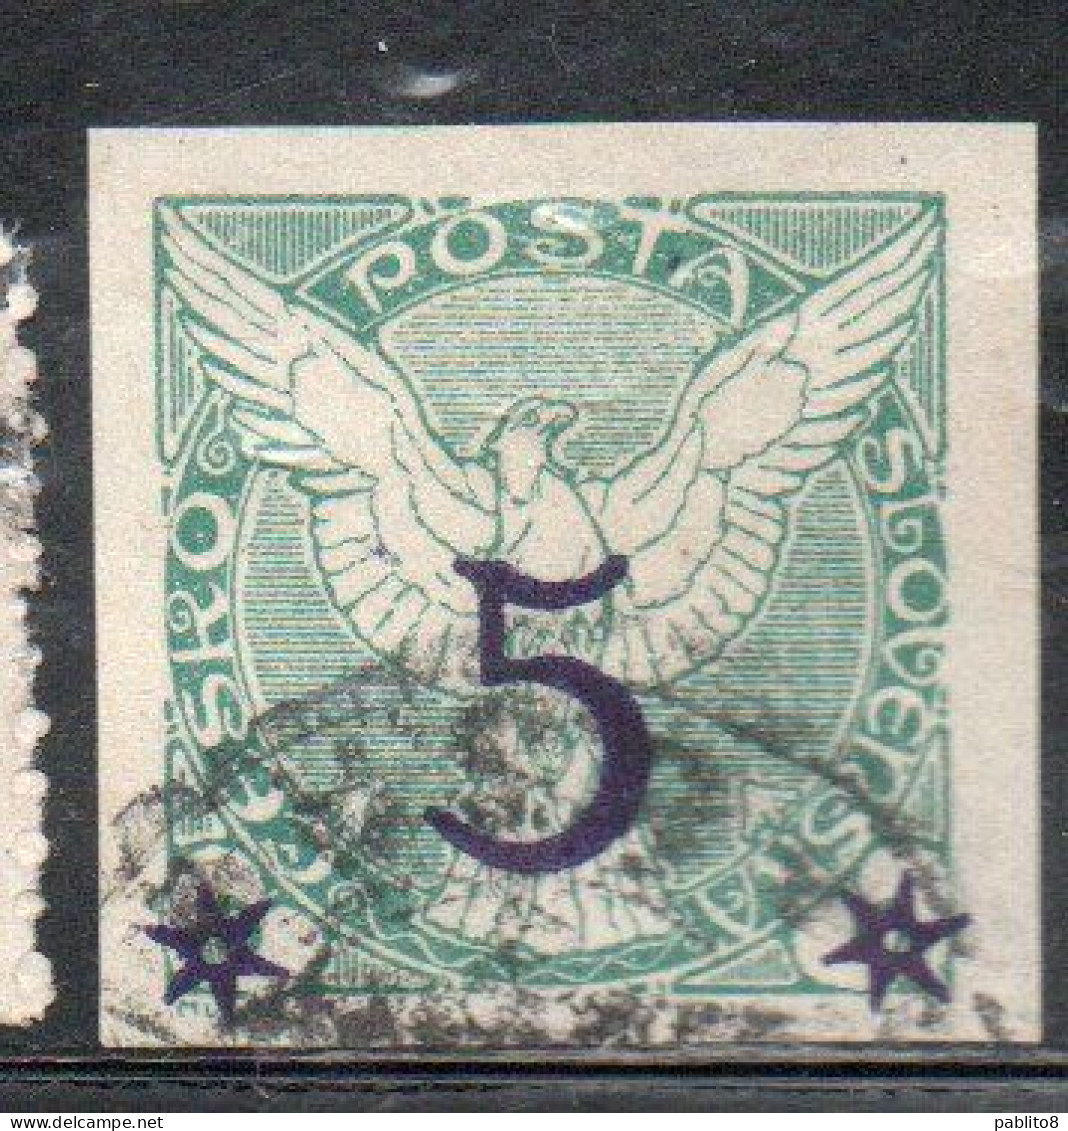 CZECH REPUBLIC CECA CZECHOSLOVAKIA CESKA CECOSLOVACCHIA 1925 NEWSPAPER STAMPS WINDHOVER SURCHARGED 5h On 2h USED - Timbres Pour Journaux